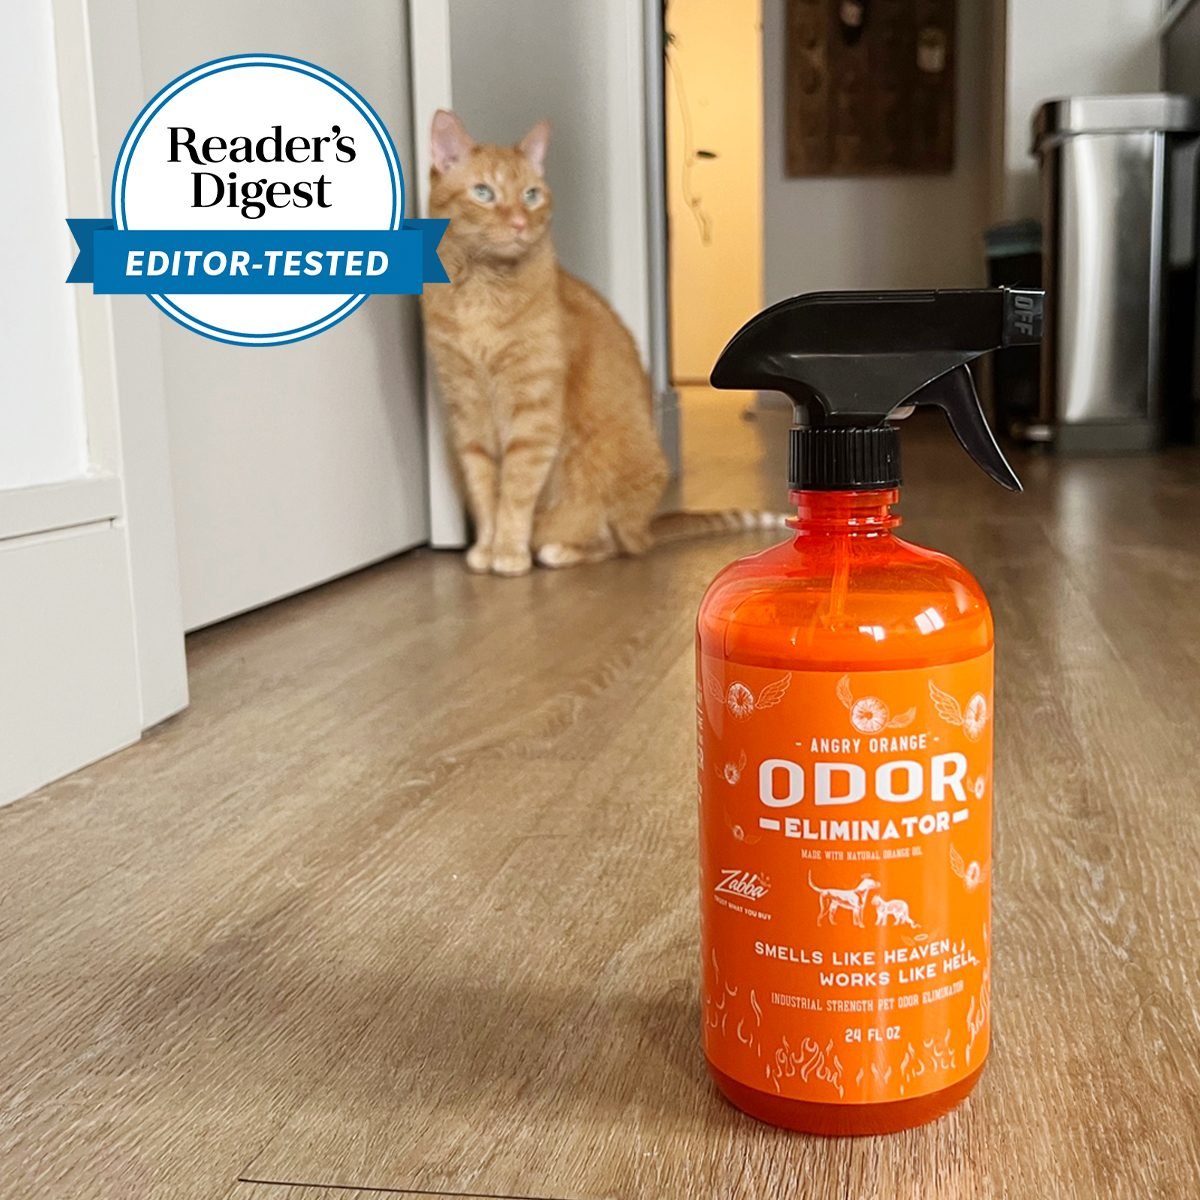 I Tried the Angry Orange Pet Odor Eliminator, and It’s Magic at Removing Stubborn Smells